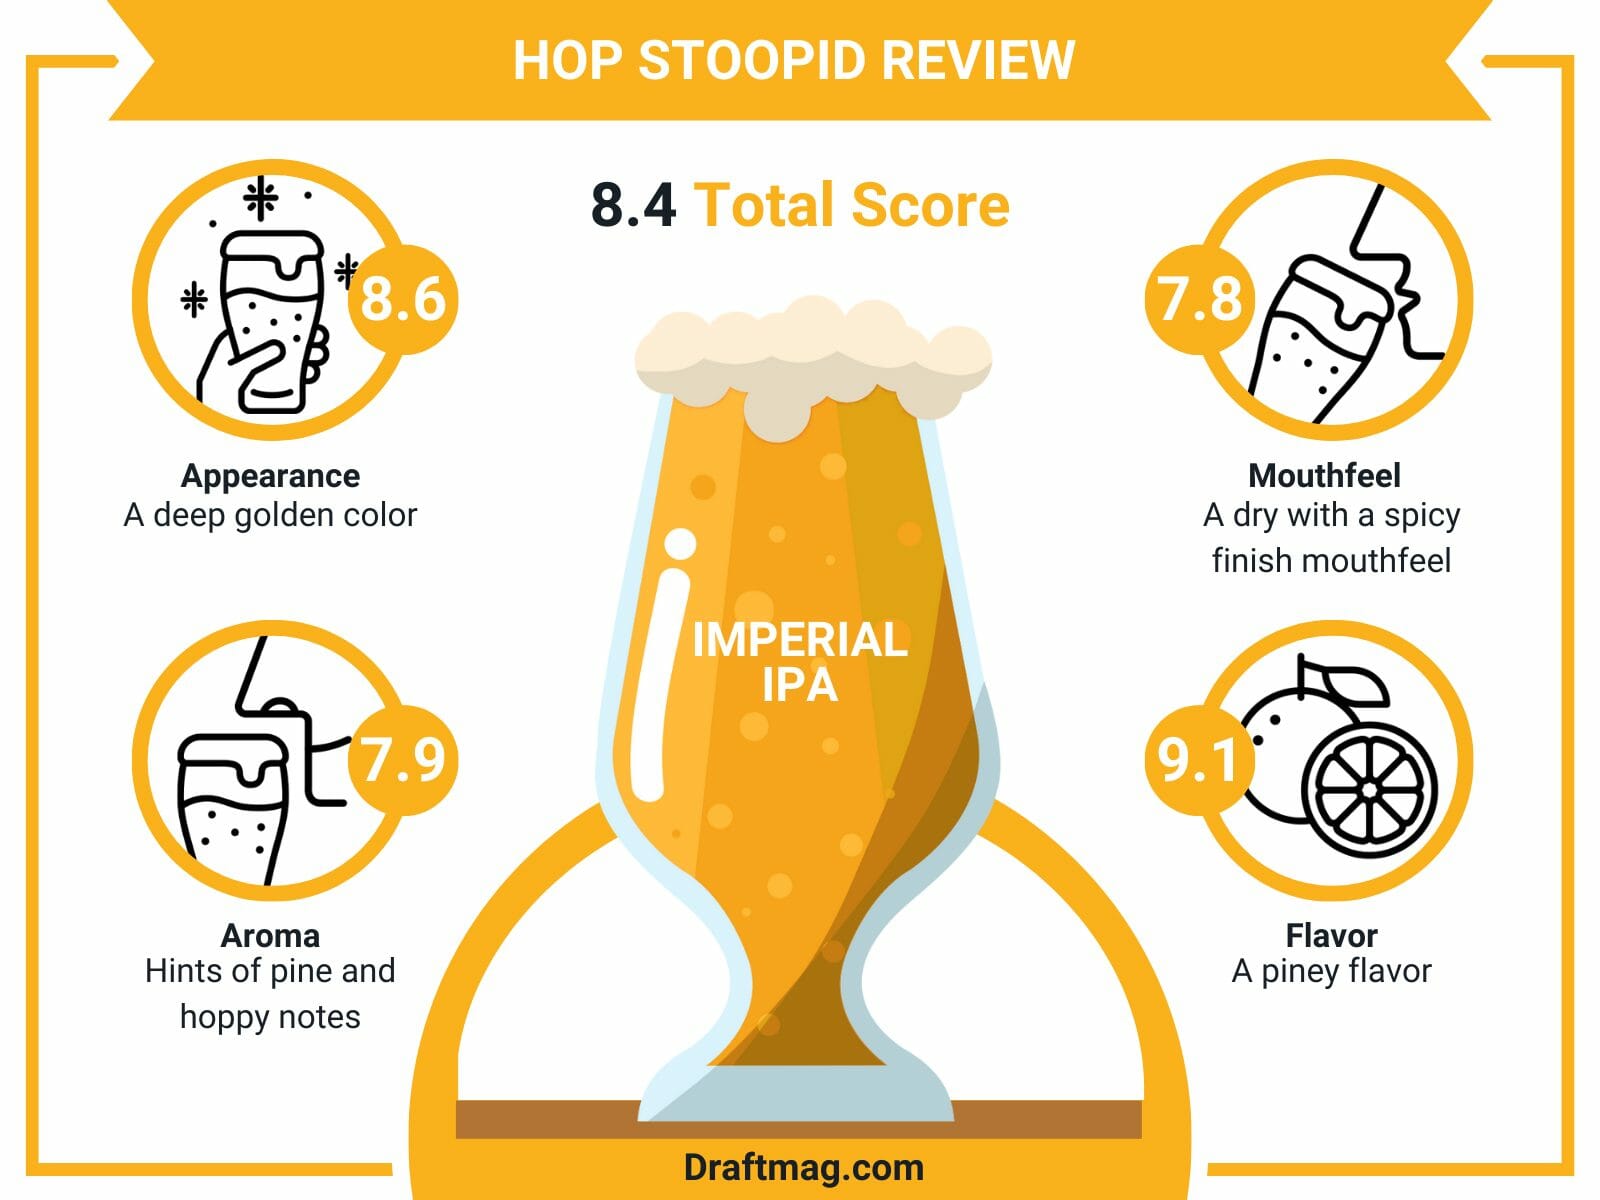 Hop Stoopid Review Infographic